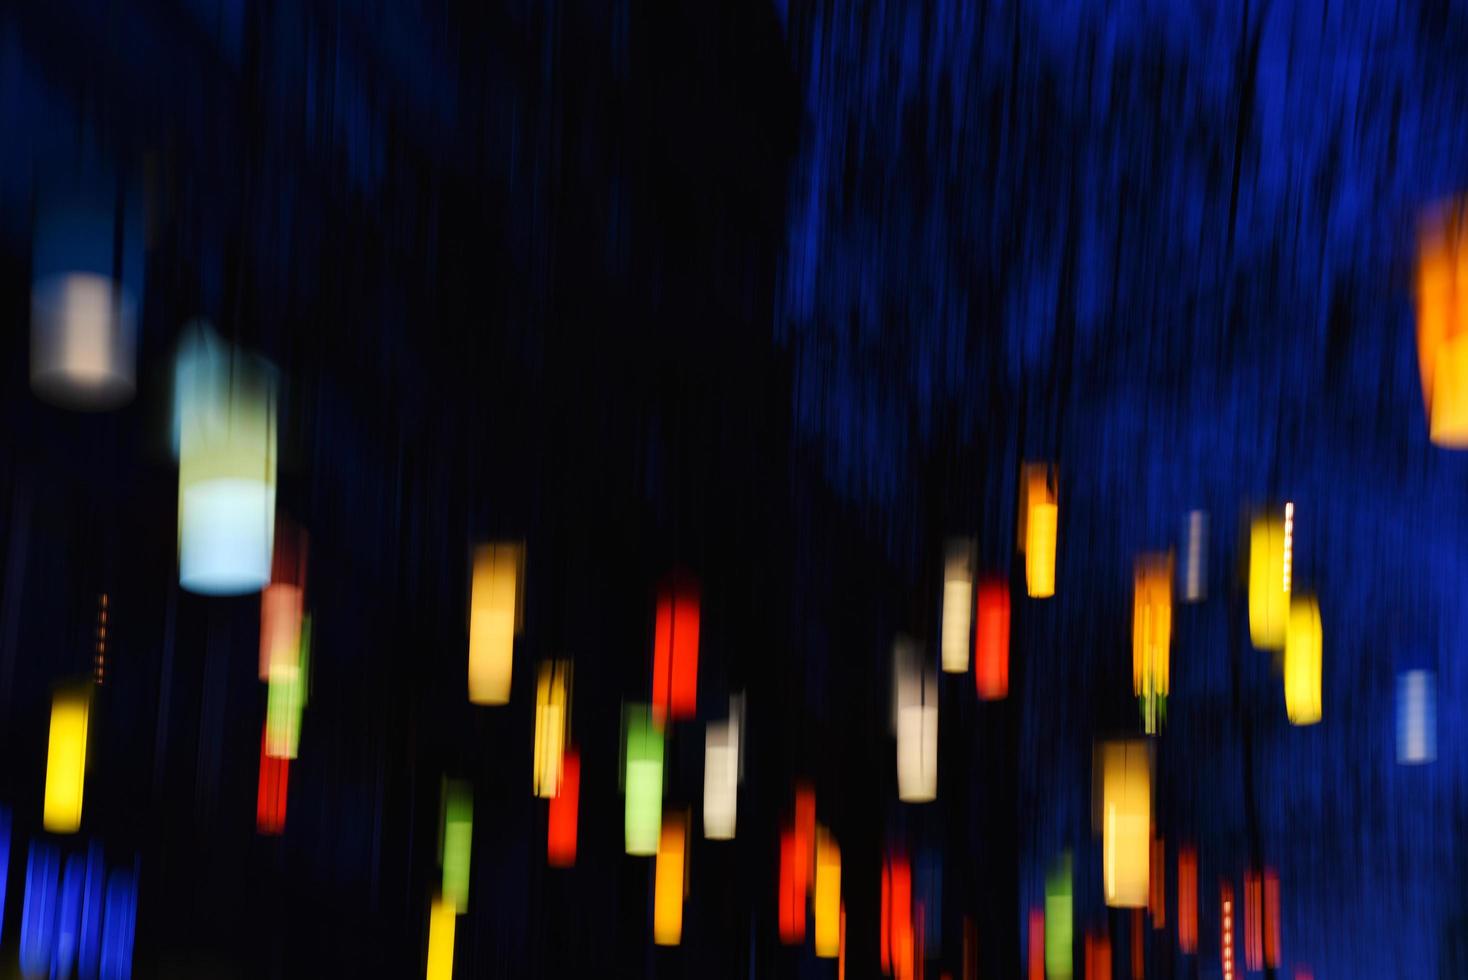 Colorful decorative abstract lights at night time as background photo